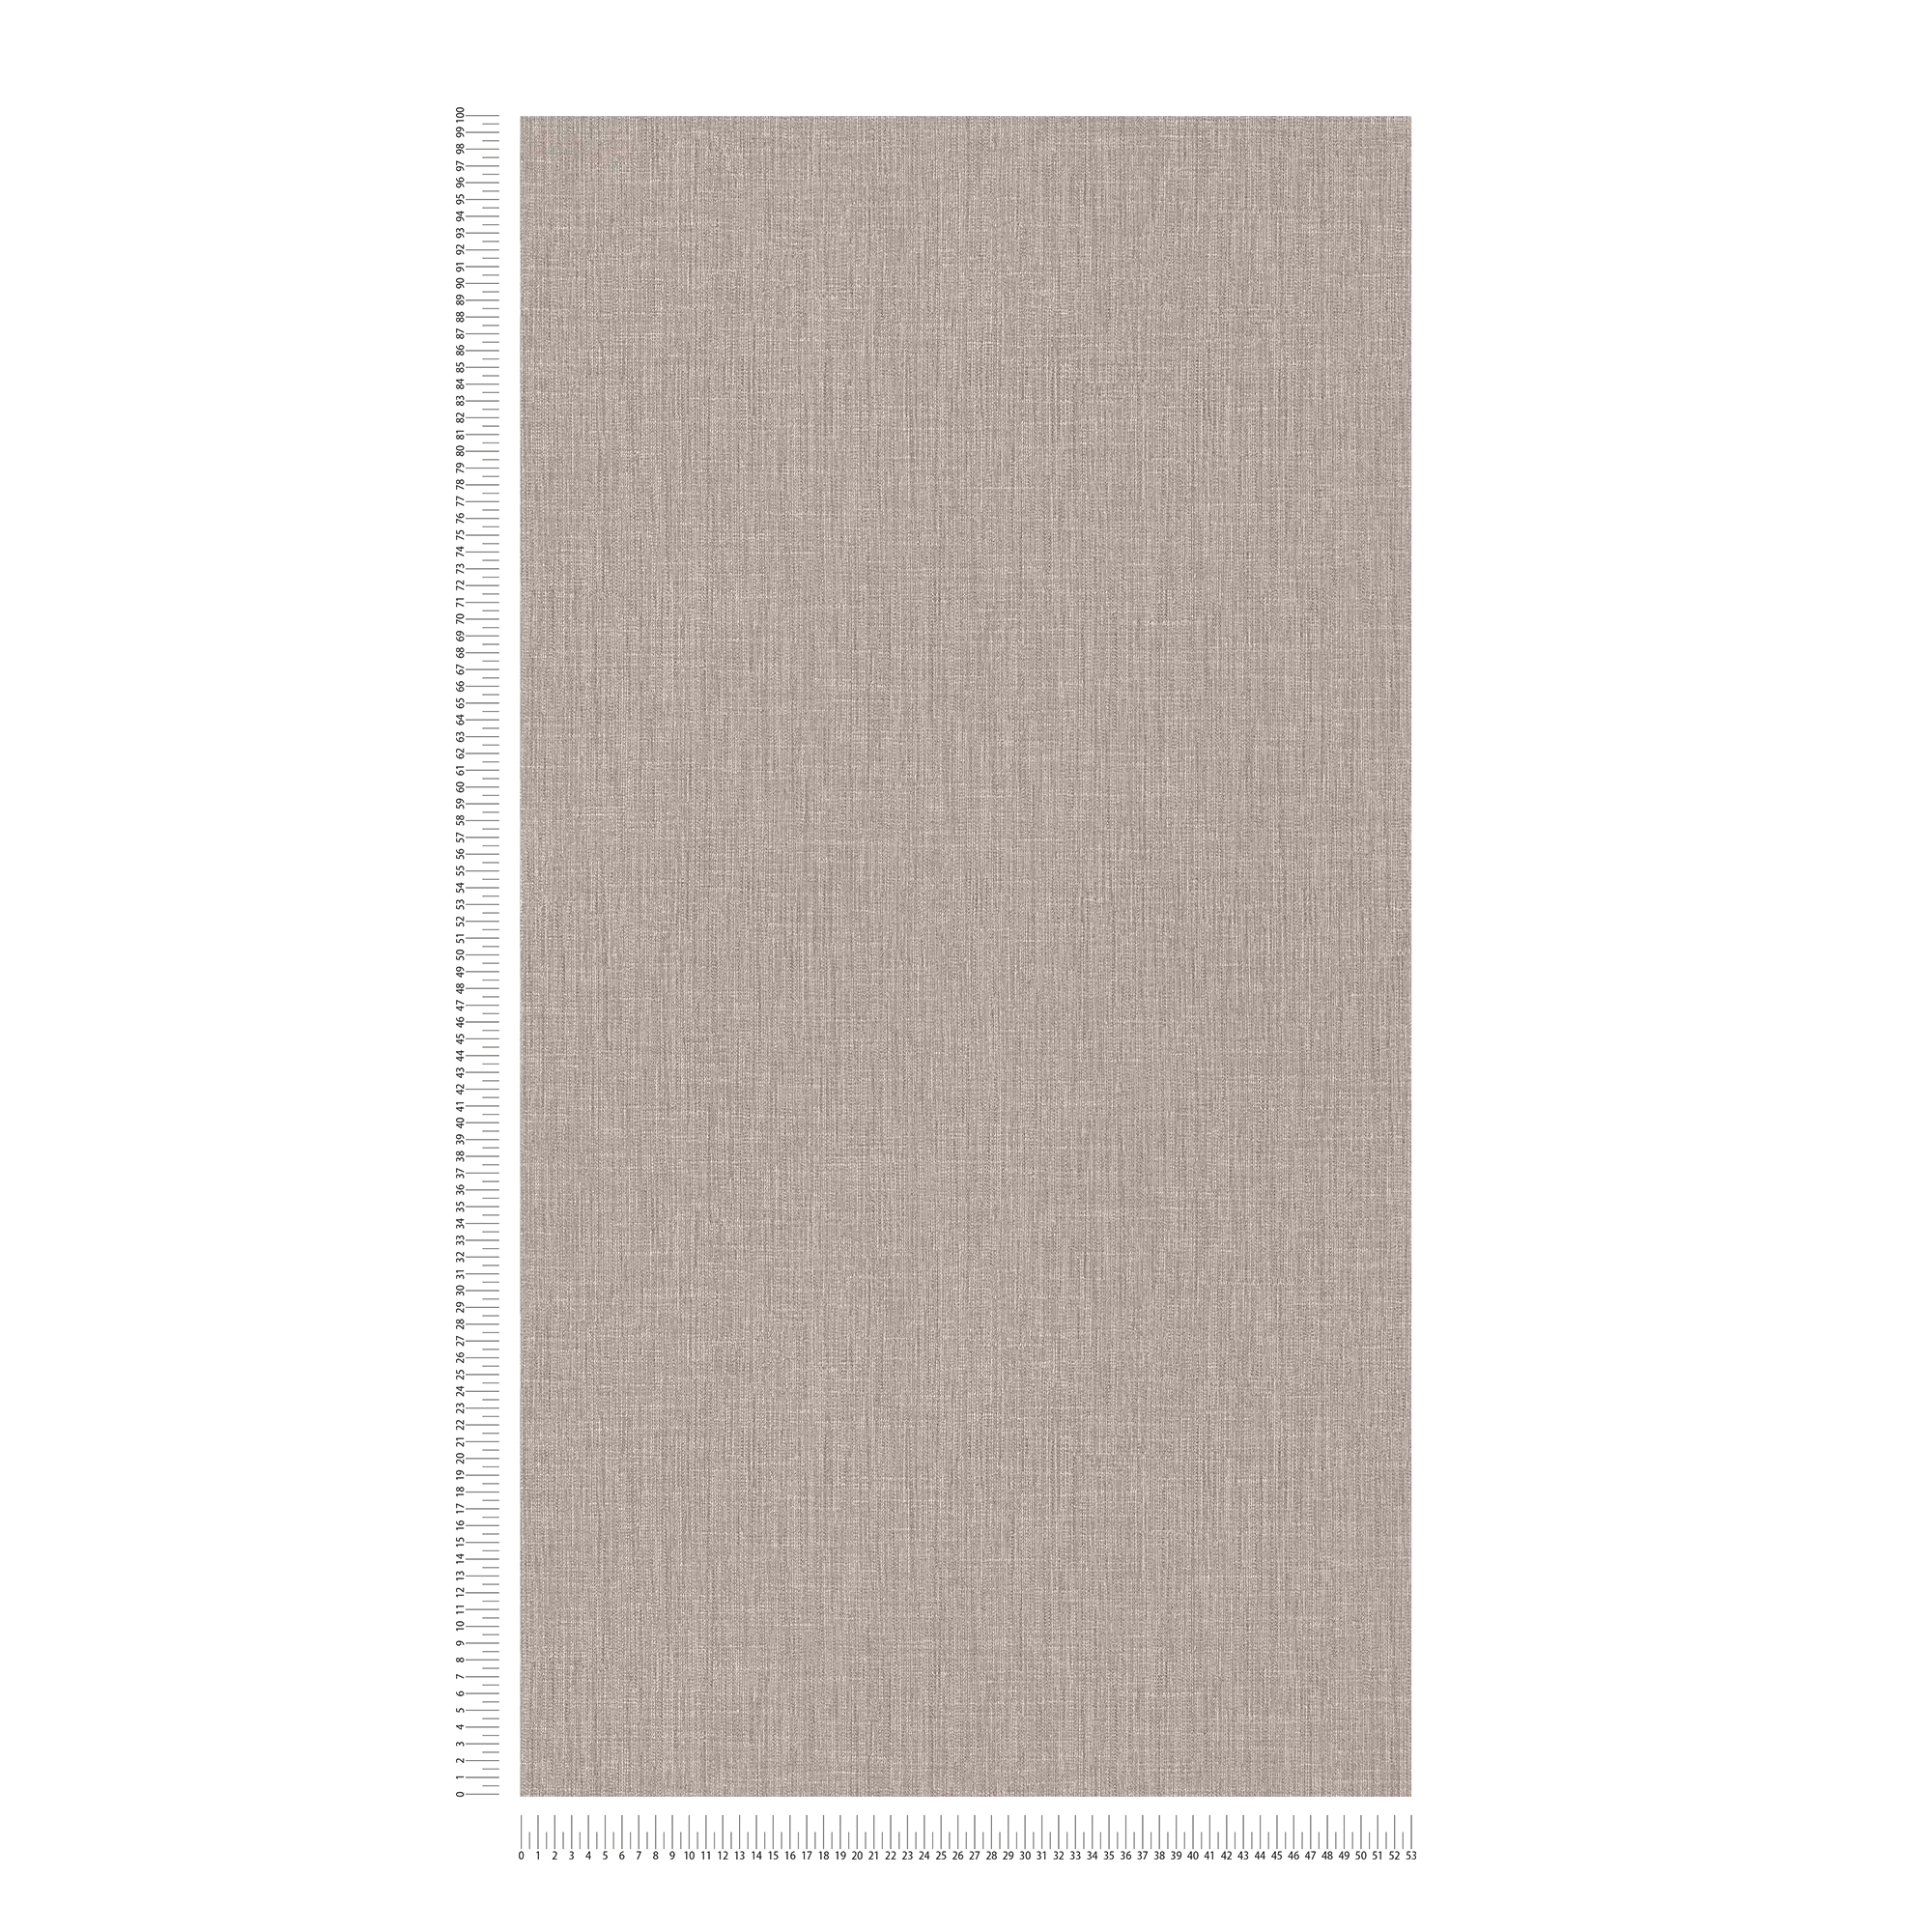             Hatched plain wallpaper with tone-on-tone pattern - beige, cream, white
        